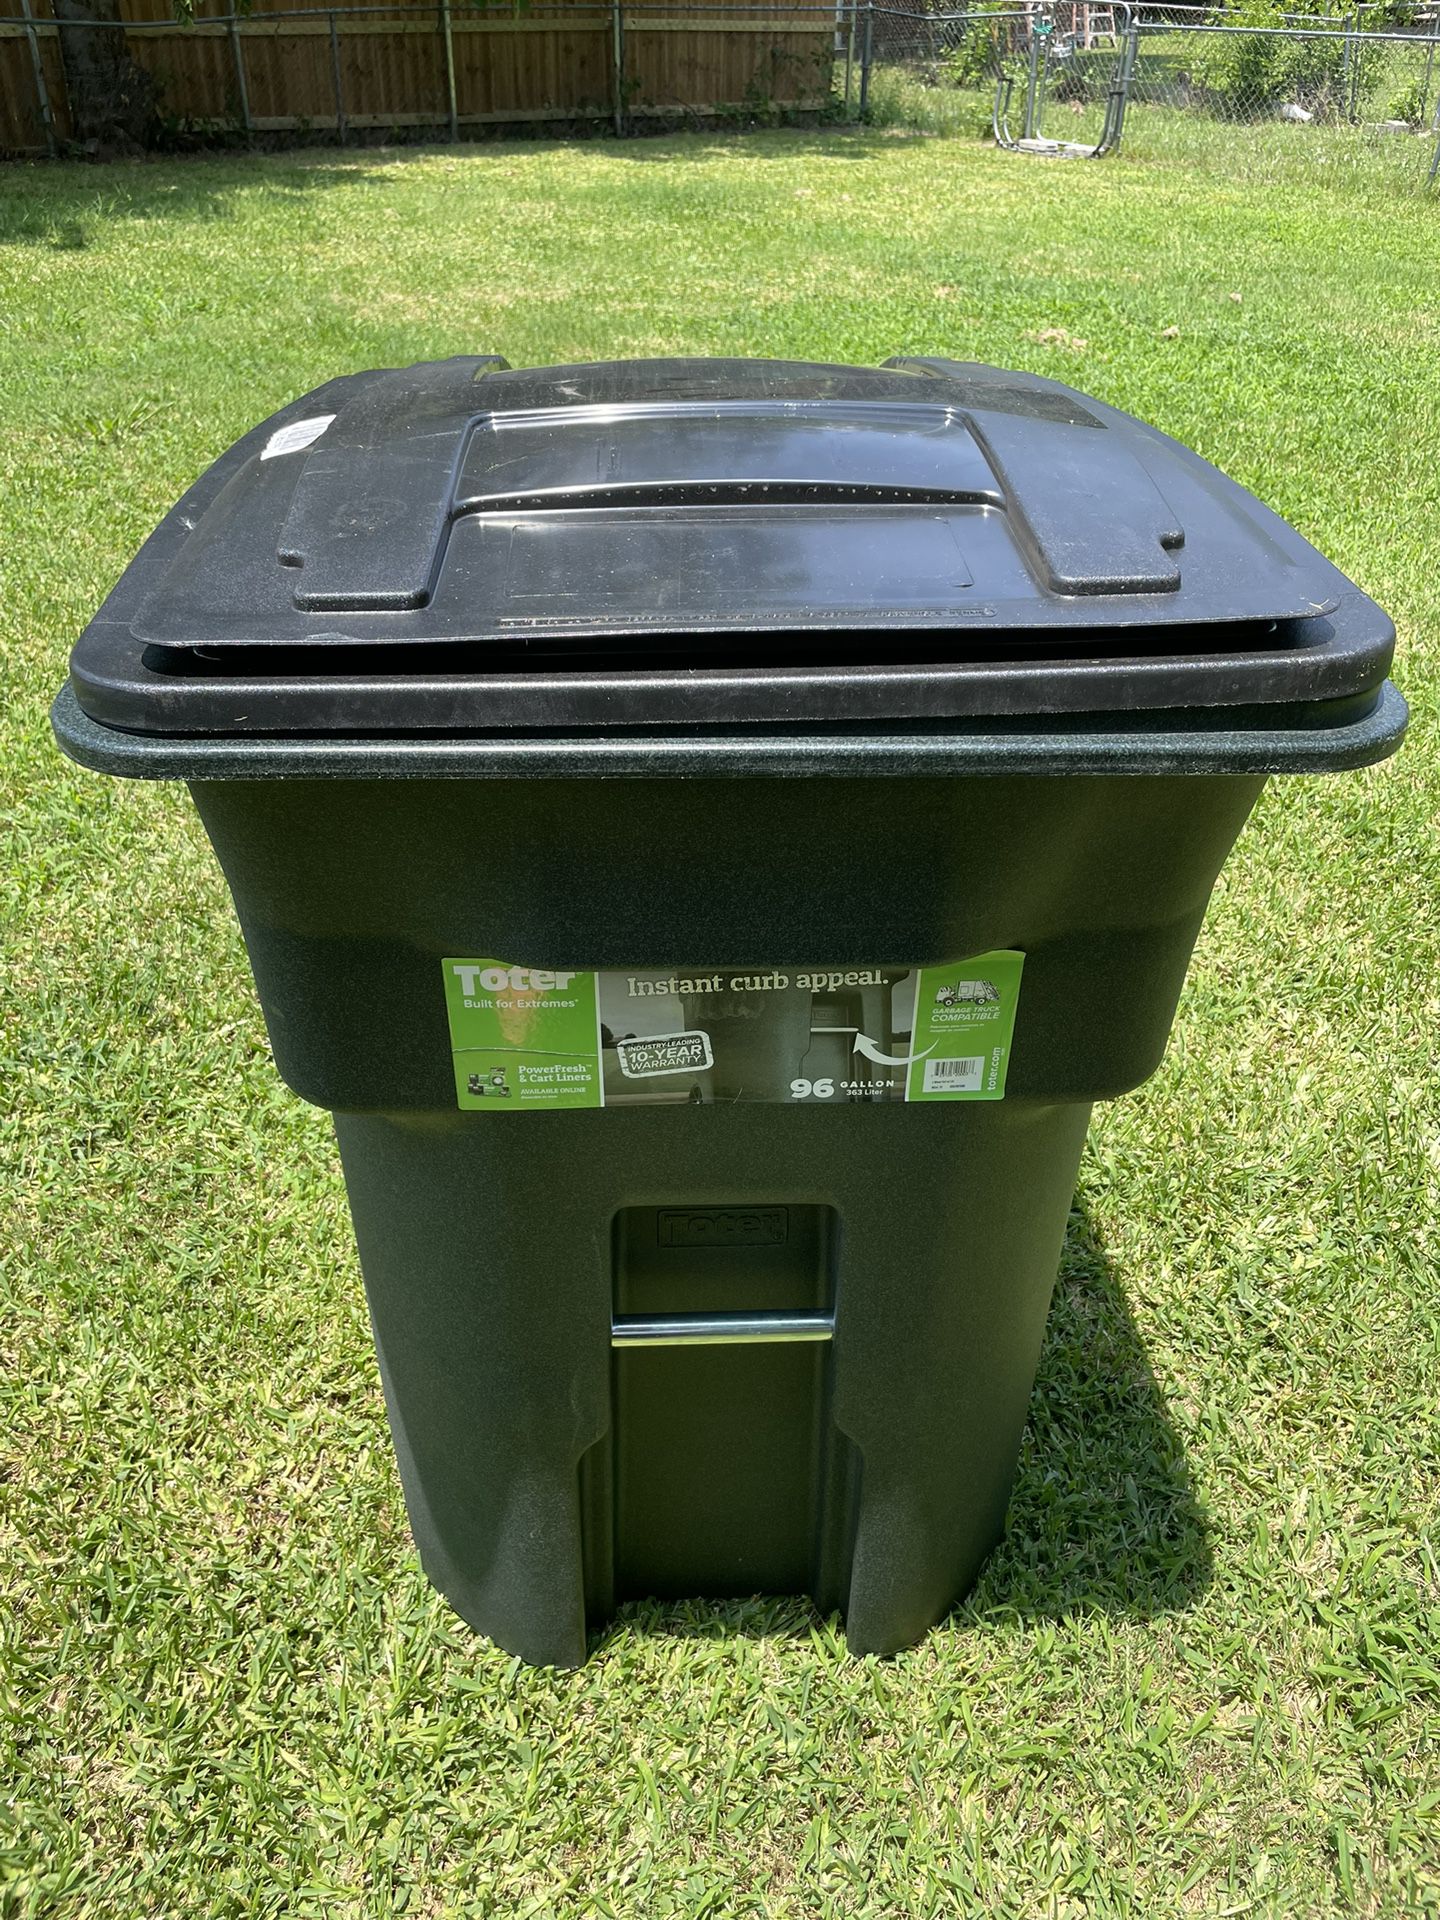 TITER 96 Gallon Dark Green Rolling Outdoor Garbage/Trash Can with